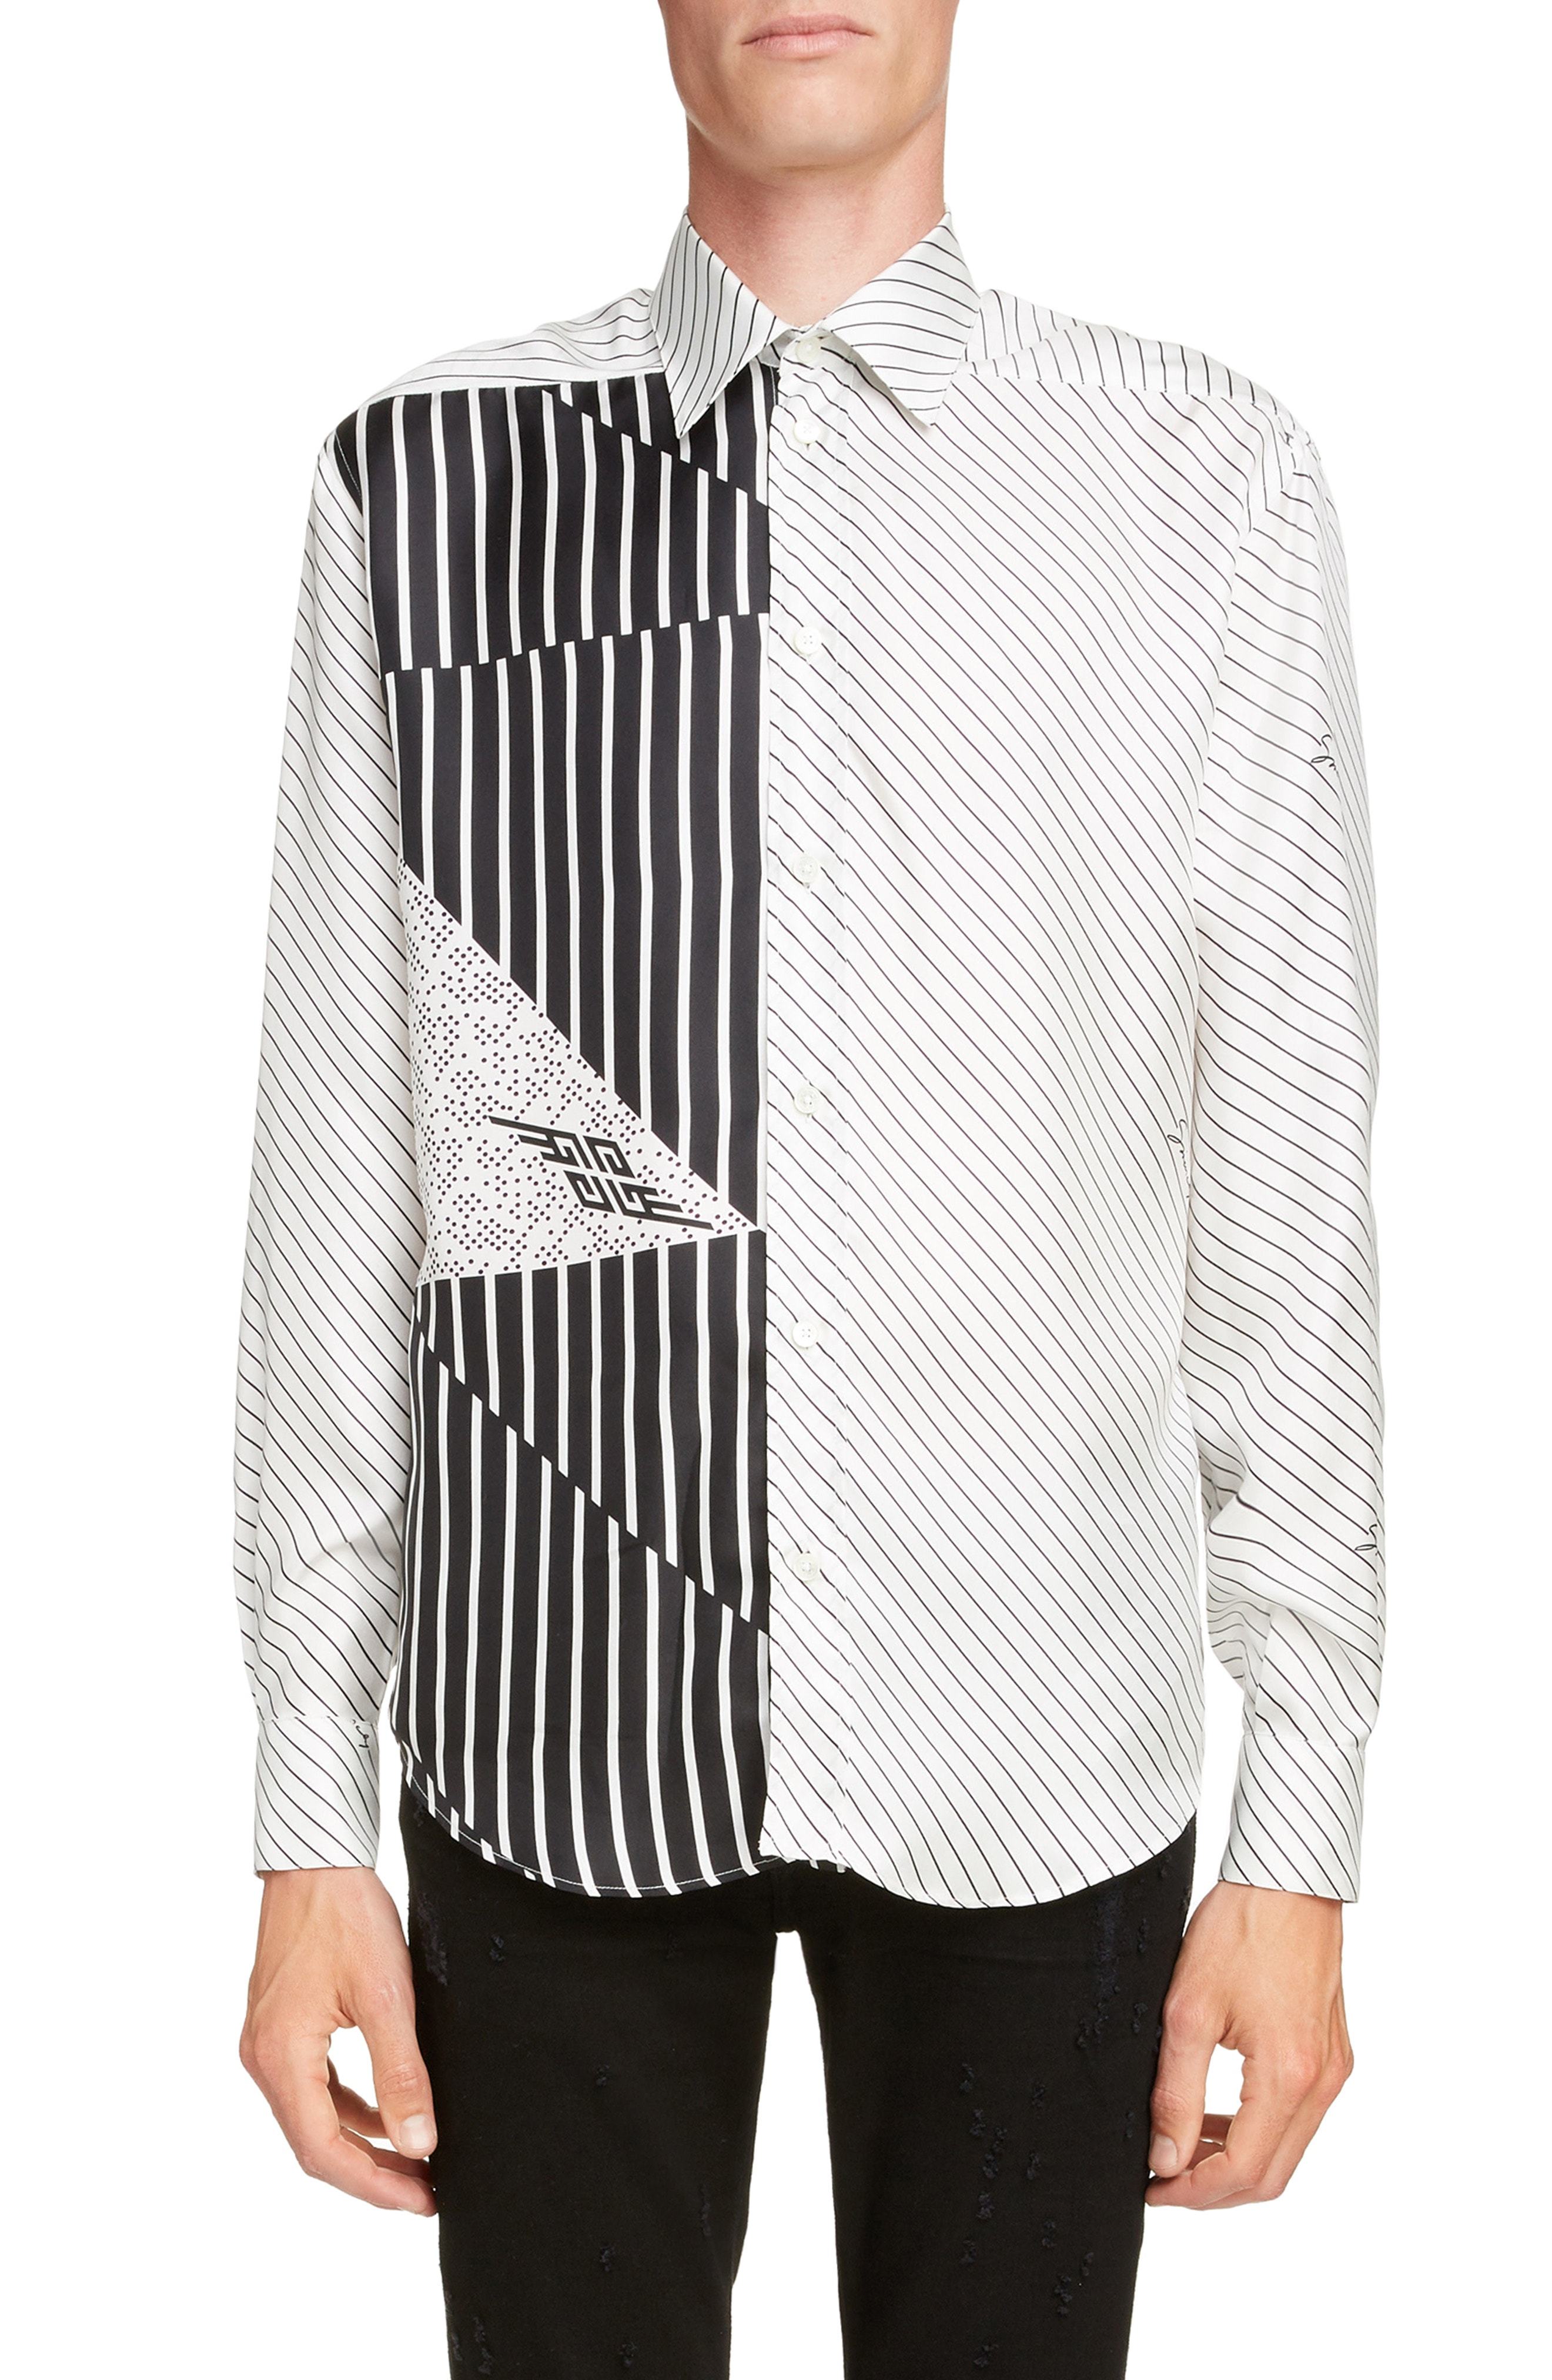 Givenchy Mixed Stripe Silk Shirt, $1,120 | Nordstrom | Lookastic